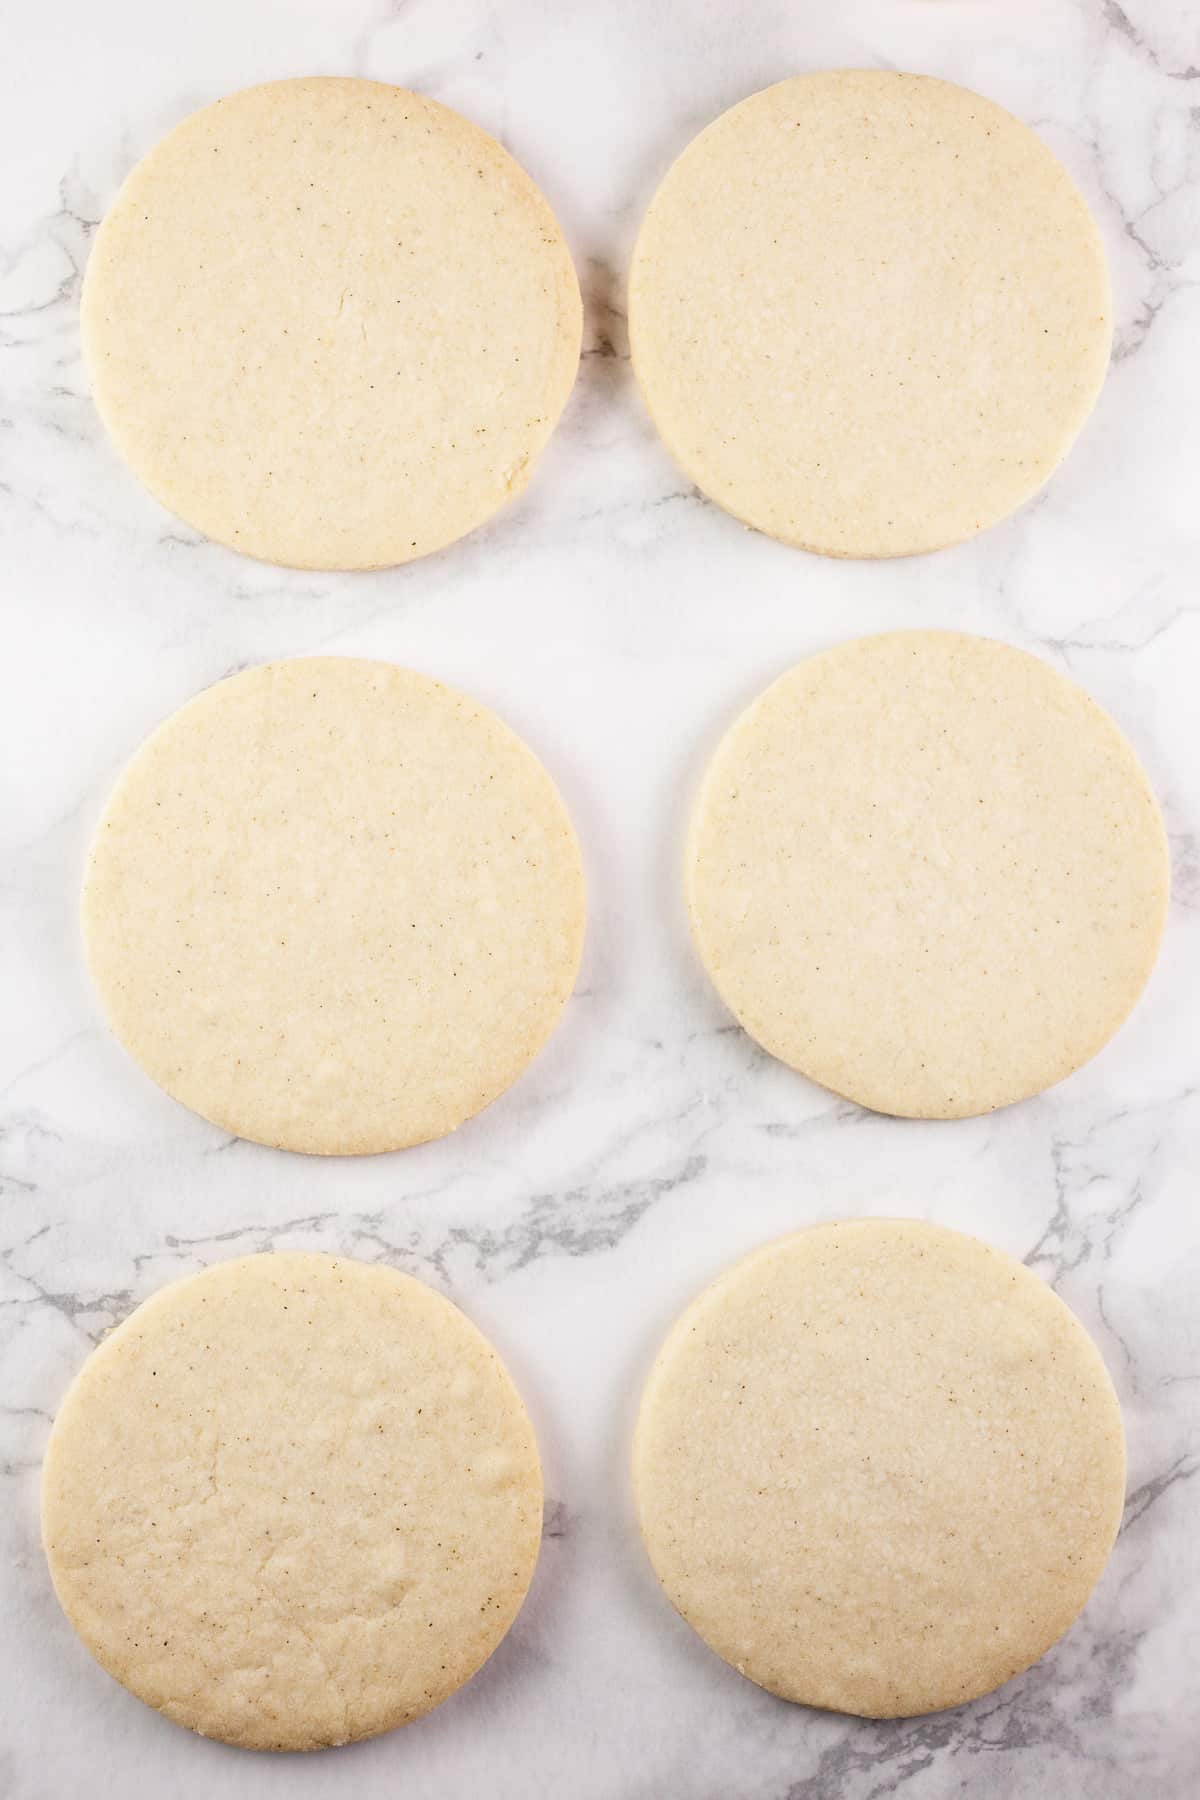 Baked shortbread cookies on white surface.